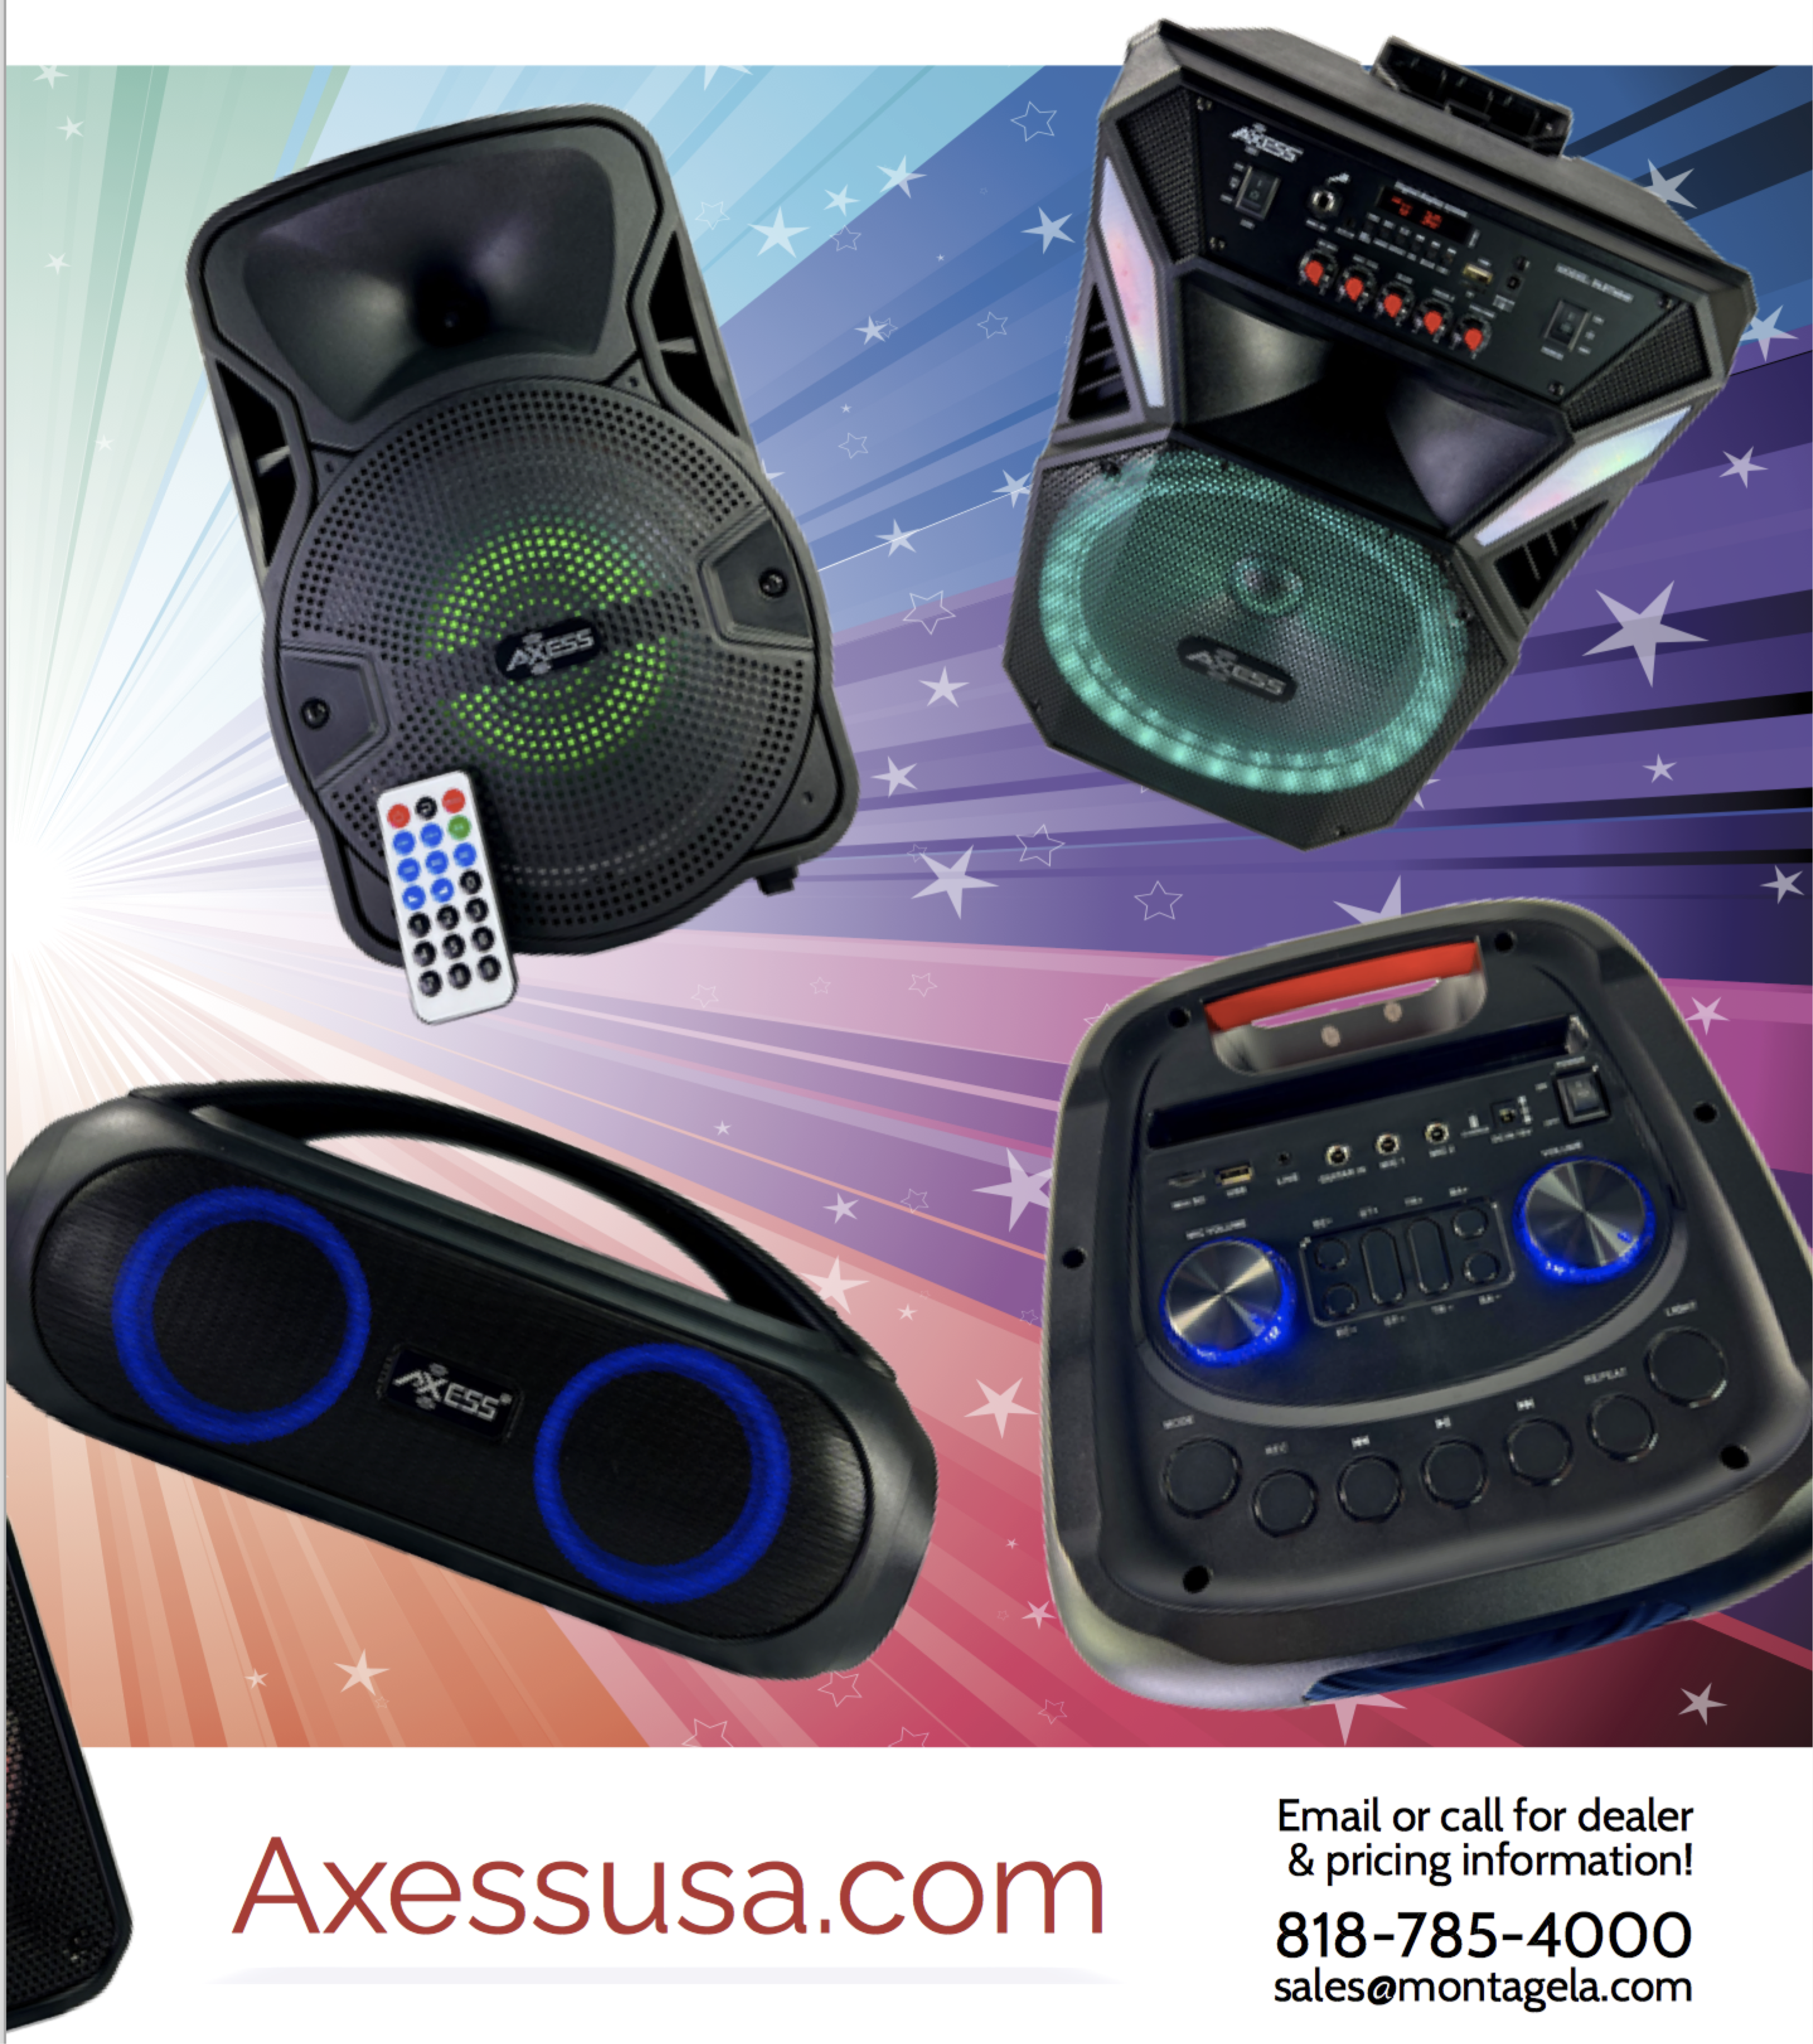 Superior Wireless Audio Products – Booming Industry!